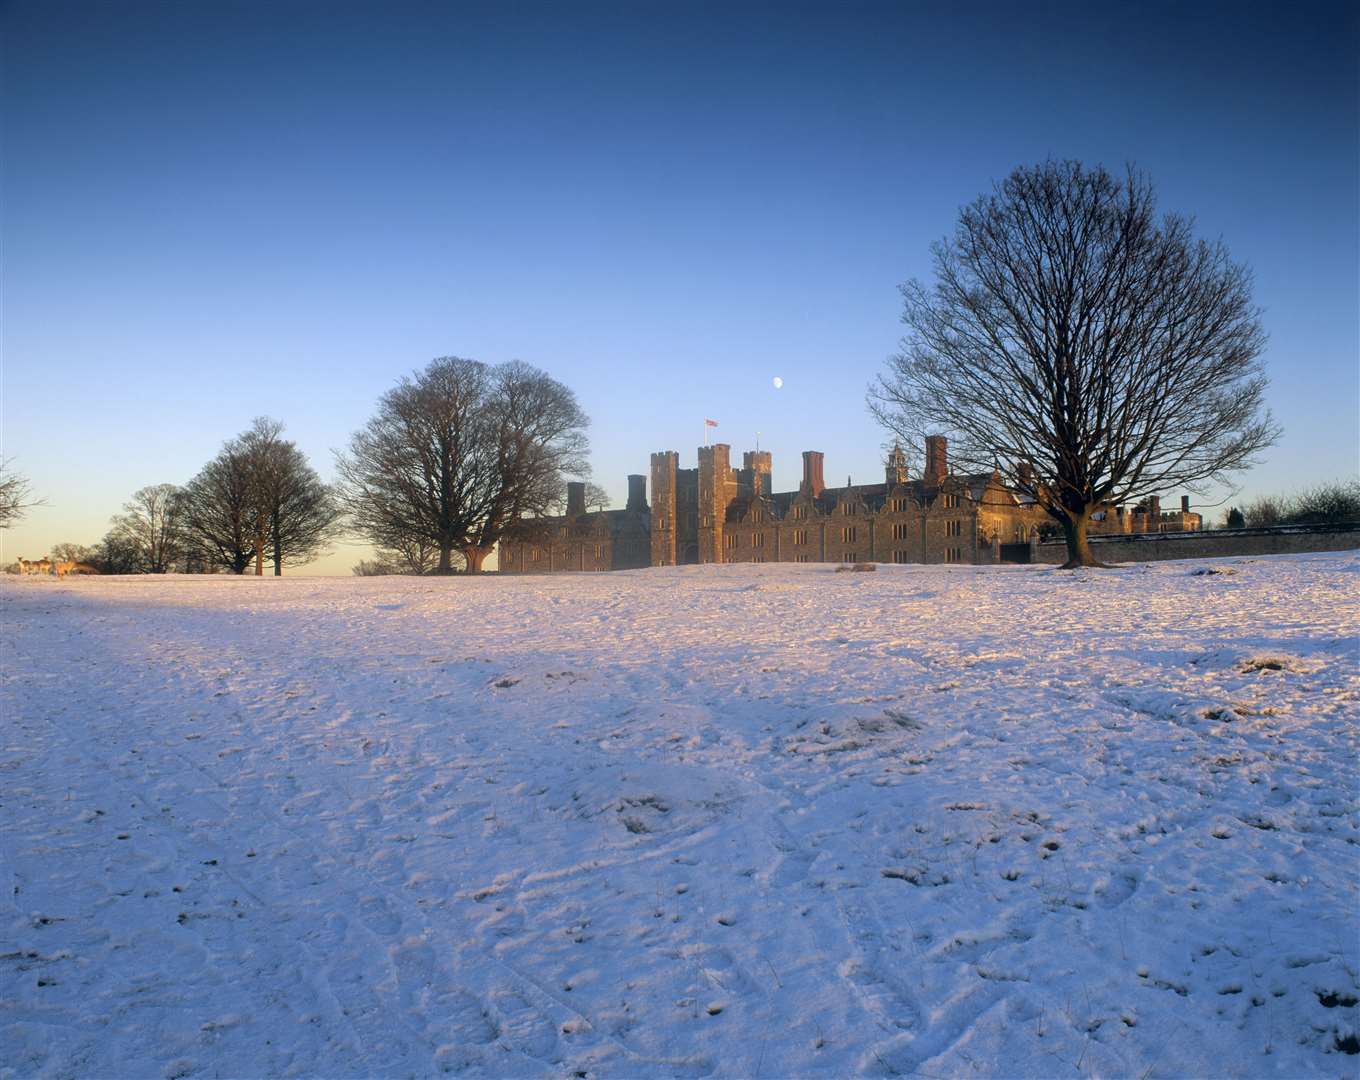 Knole and its deer park is a beautiful place to visit in the winter. Picture: ©National Trust Images/David Sellman